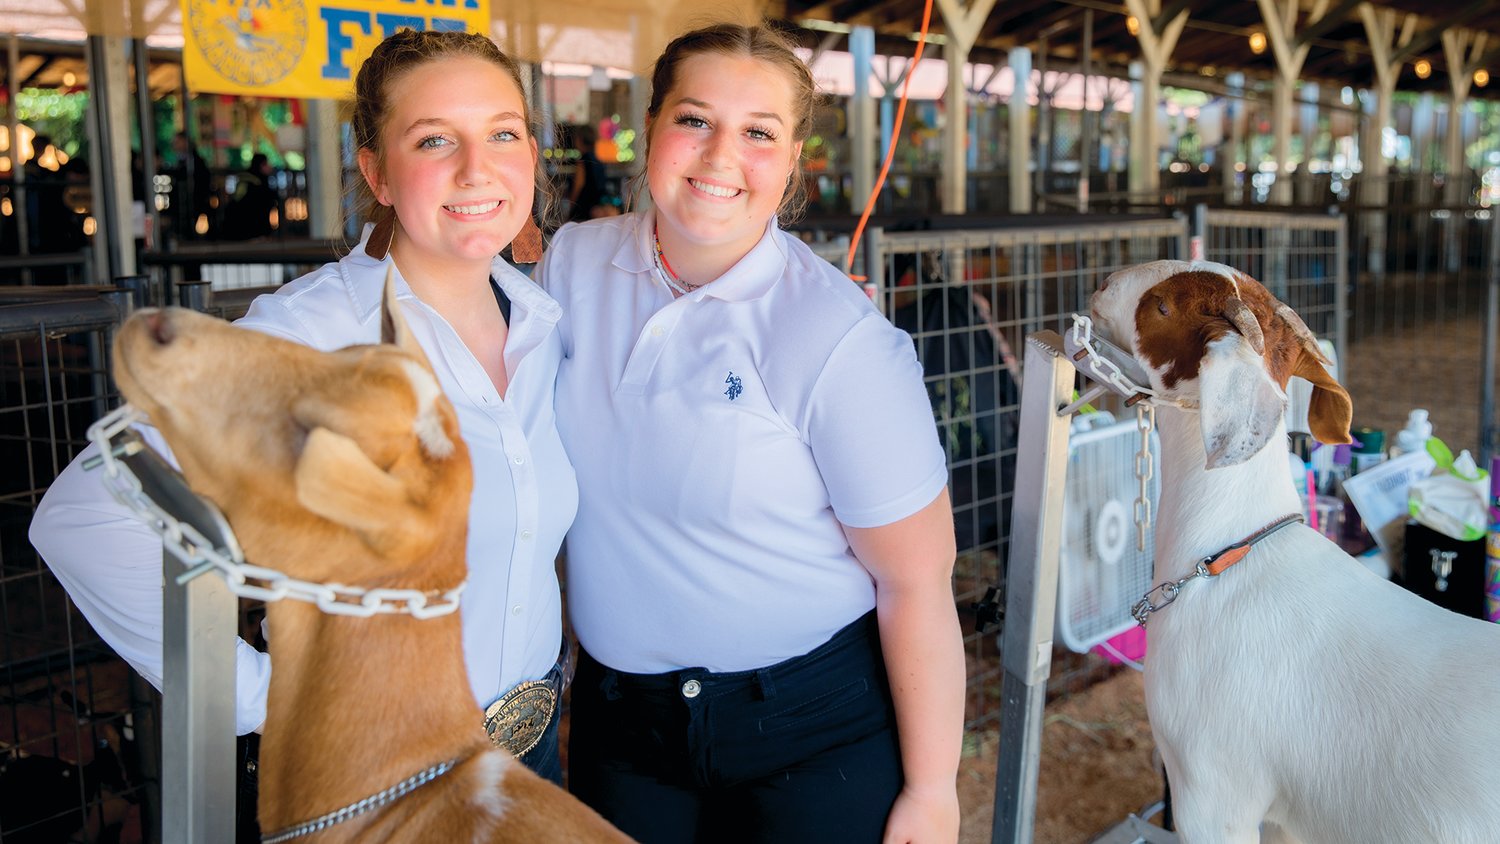 Callie Thomas and Clara Price, of Chehalis, smile for a photo with goats Lani and Charlie at the Thurston County Fair on Thursday.